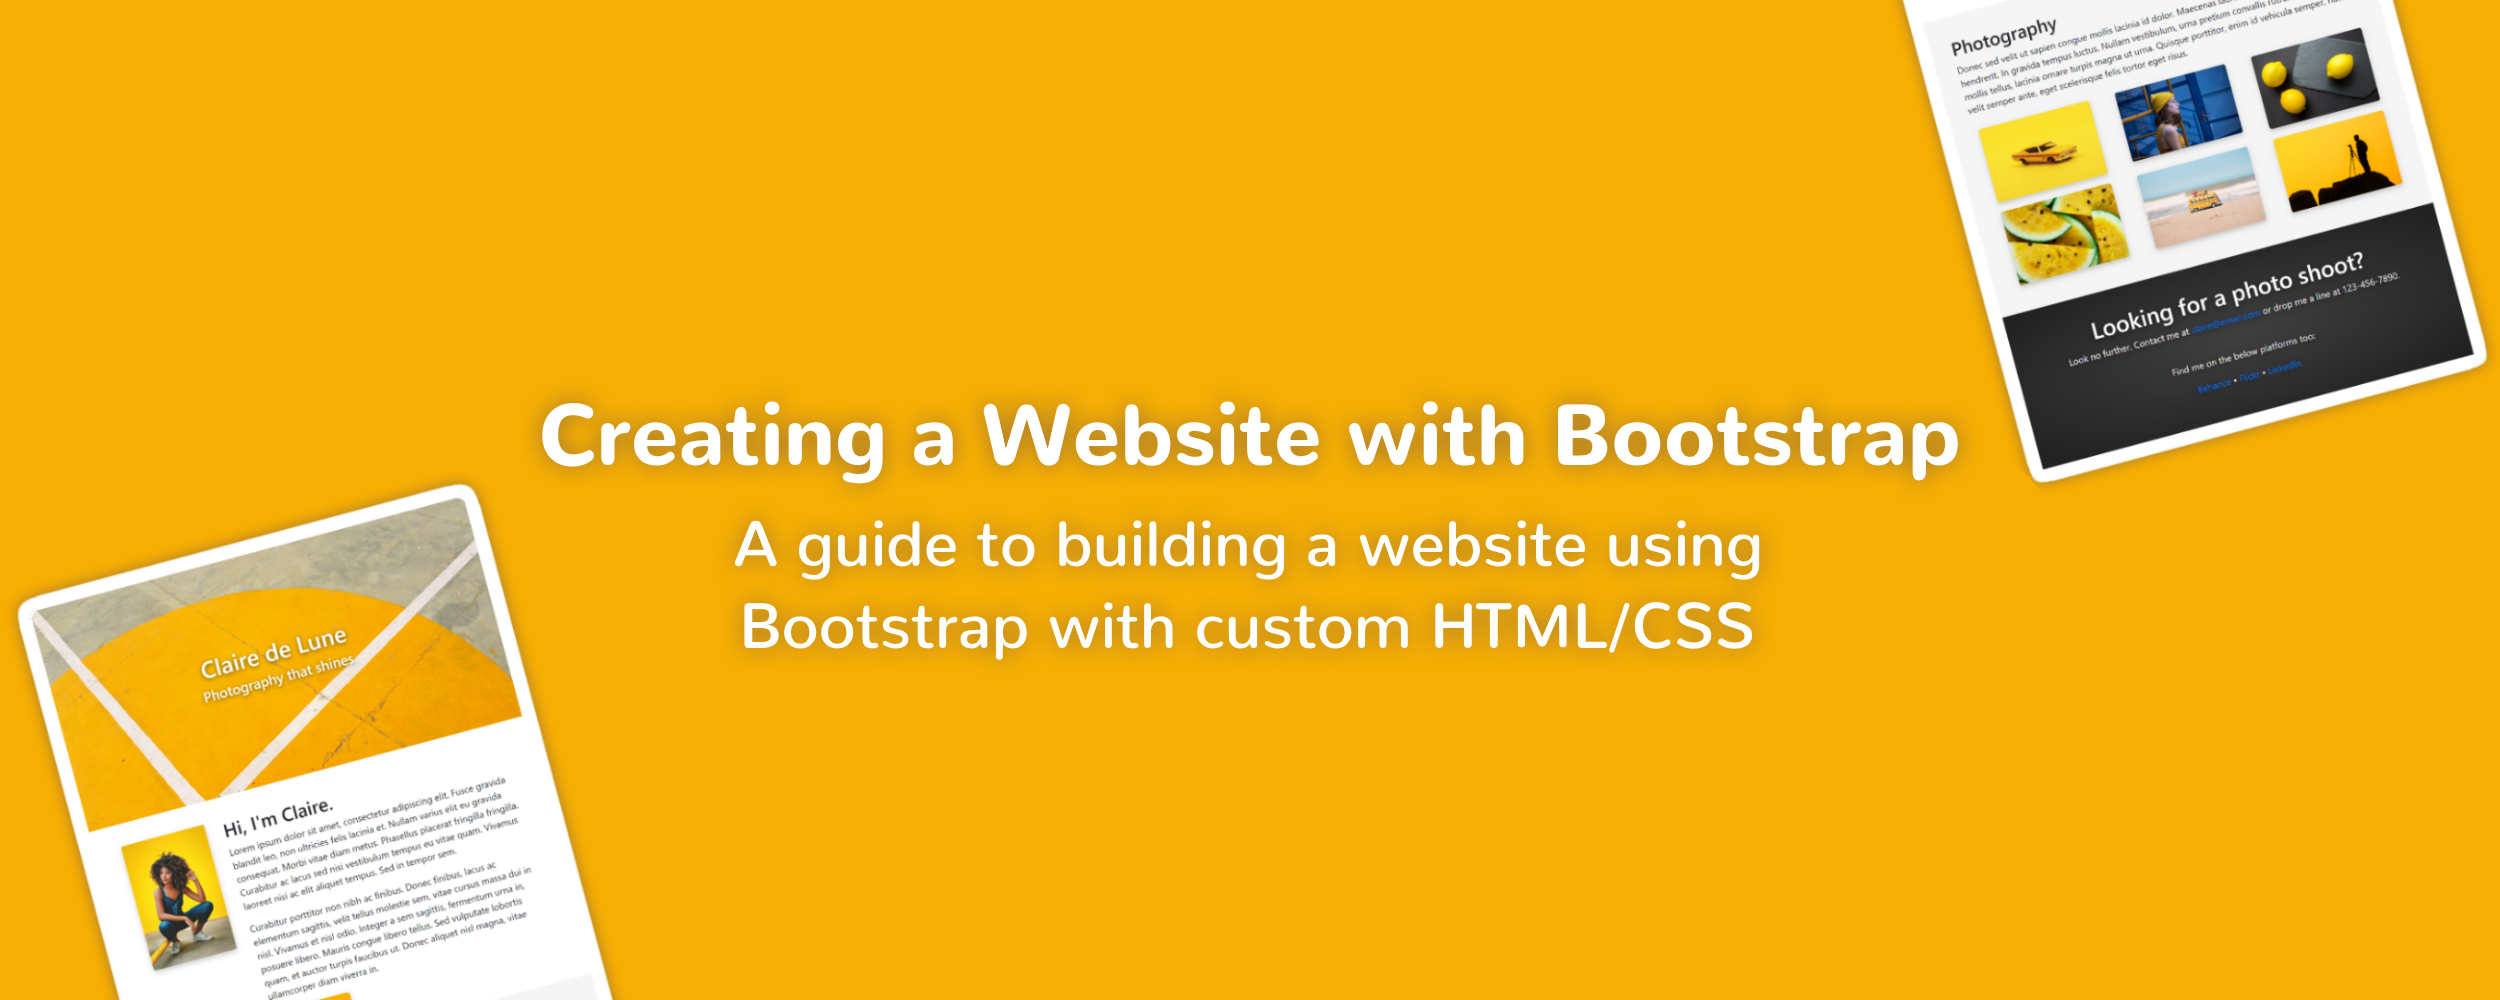 Creating a Website with Bootstrap carousel item